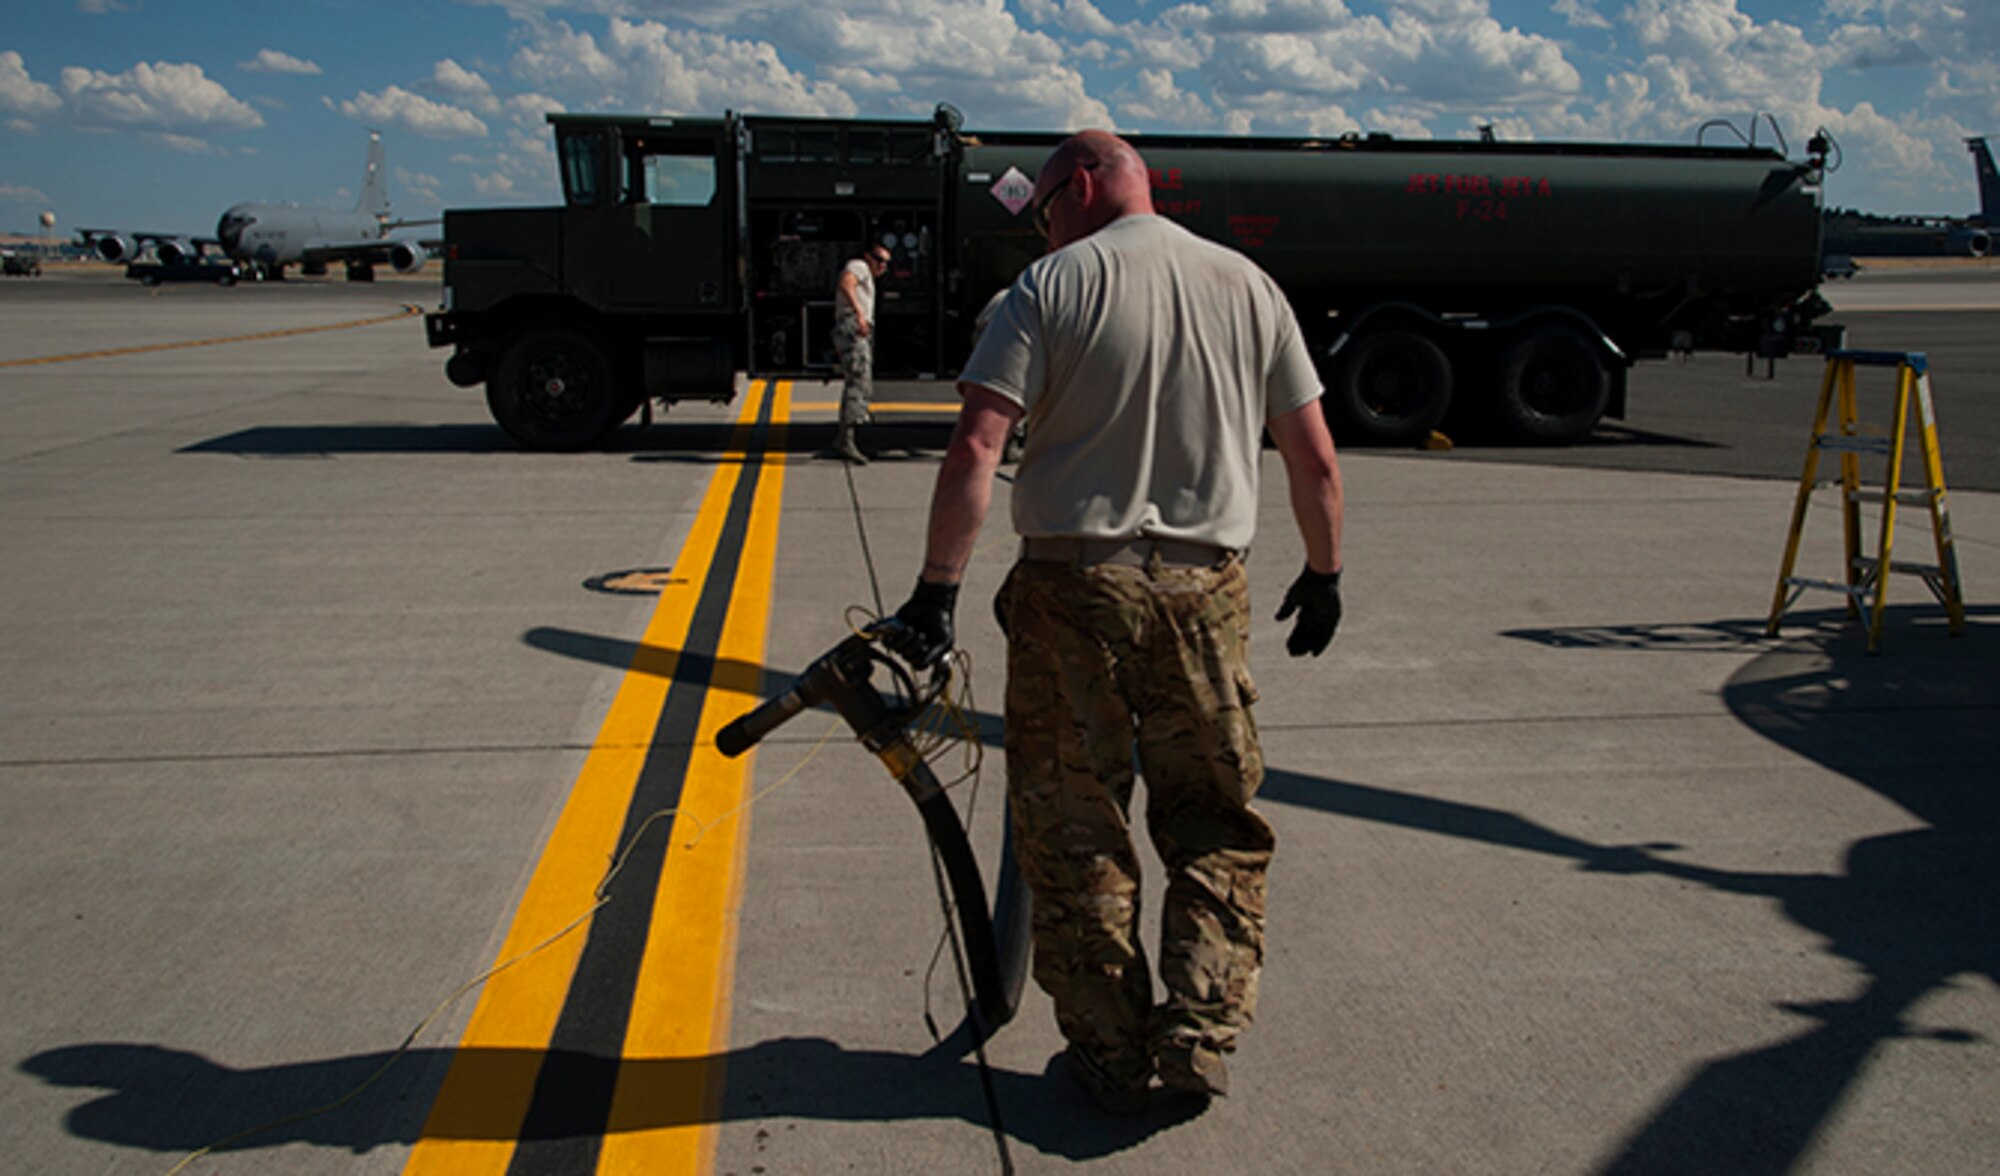 Airman 1st Class Michael Peek, 92nd Logistics Readiness Squadron refueling equipment operator, works with Staff Sgt. Scott Johnson, 140th Aviation Brigade, Washington Army National Guard, aircraft mechanic, to roll up a R-11 fuel truck hose after completing a refuel of a UH-72 Lakota helicopter July 25, 2016, at Fairchild Air Force Base, Wash. R-11 trucks can hold up to 6,000 gallons for fuel at a time. (U.S. Air Force photo/ Airman 1st Class Ryan Lackey)